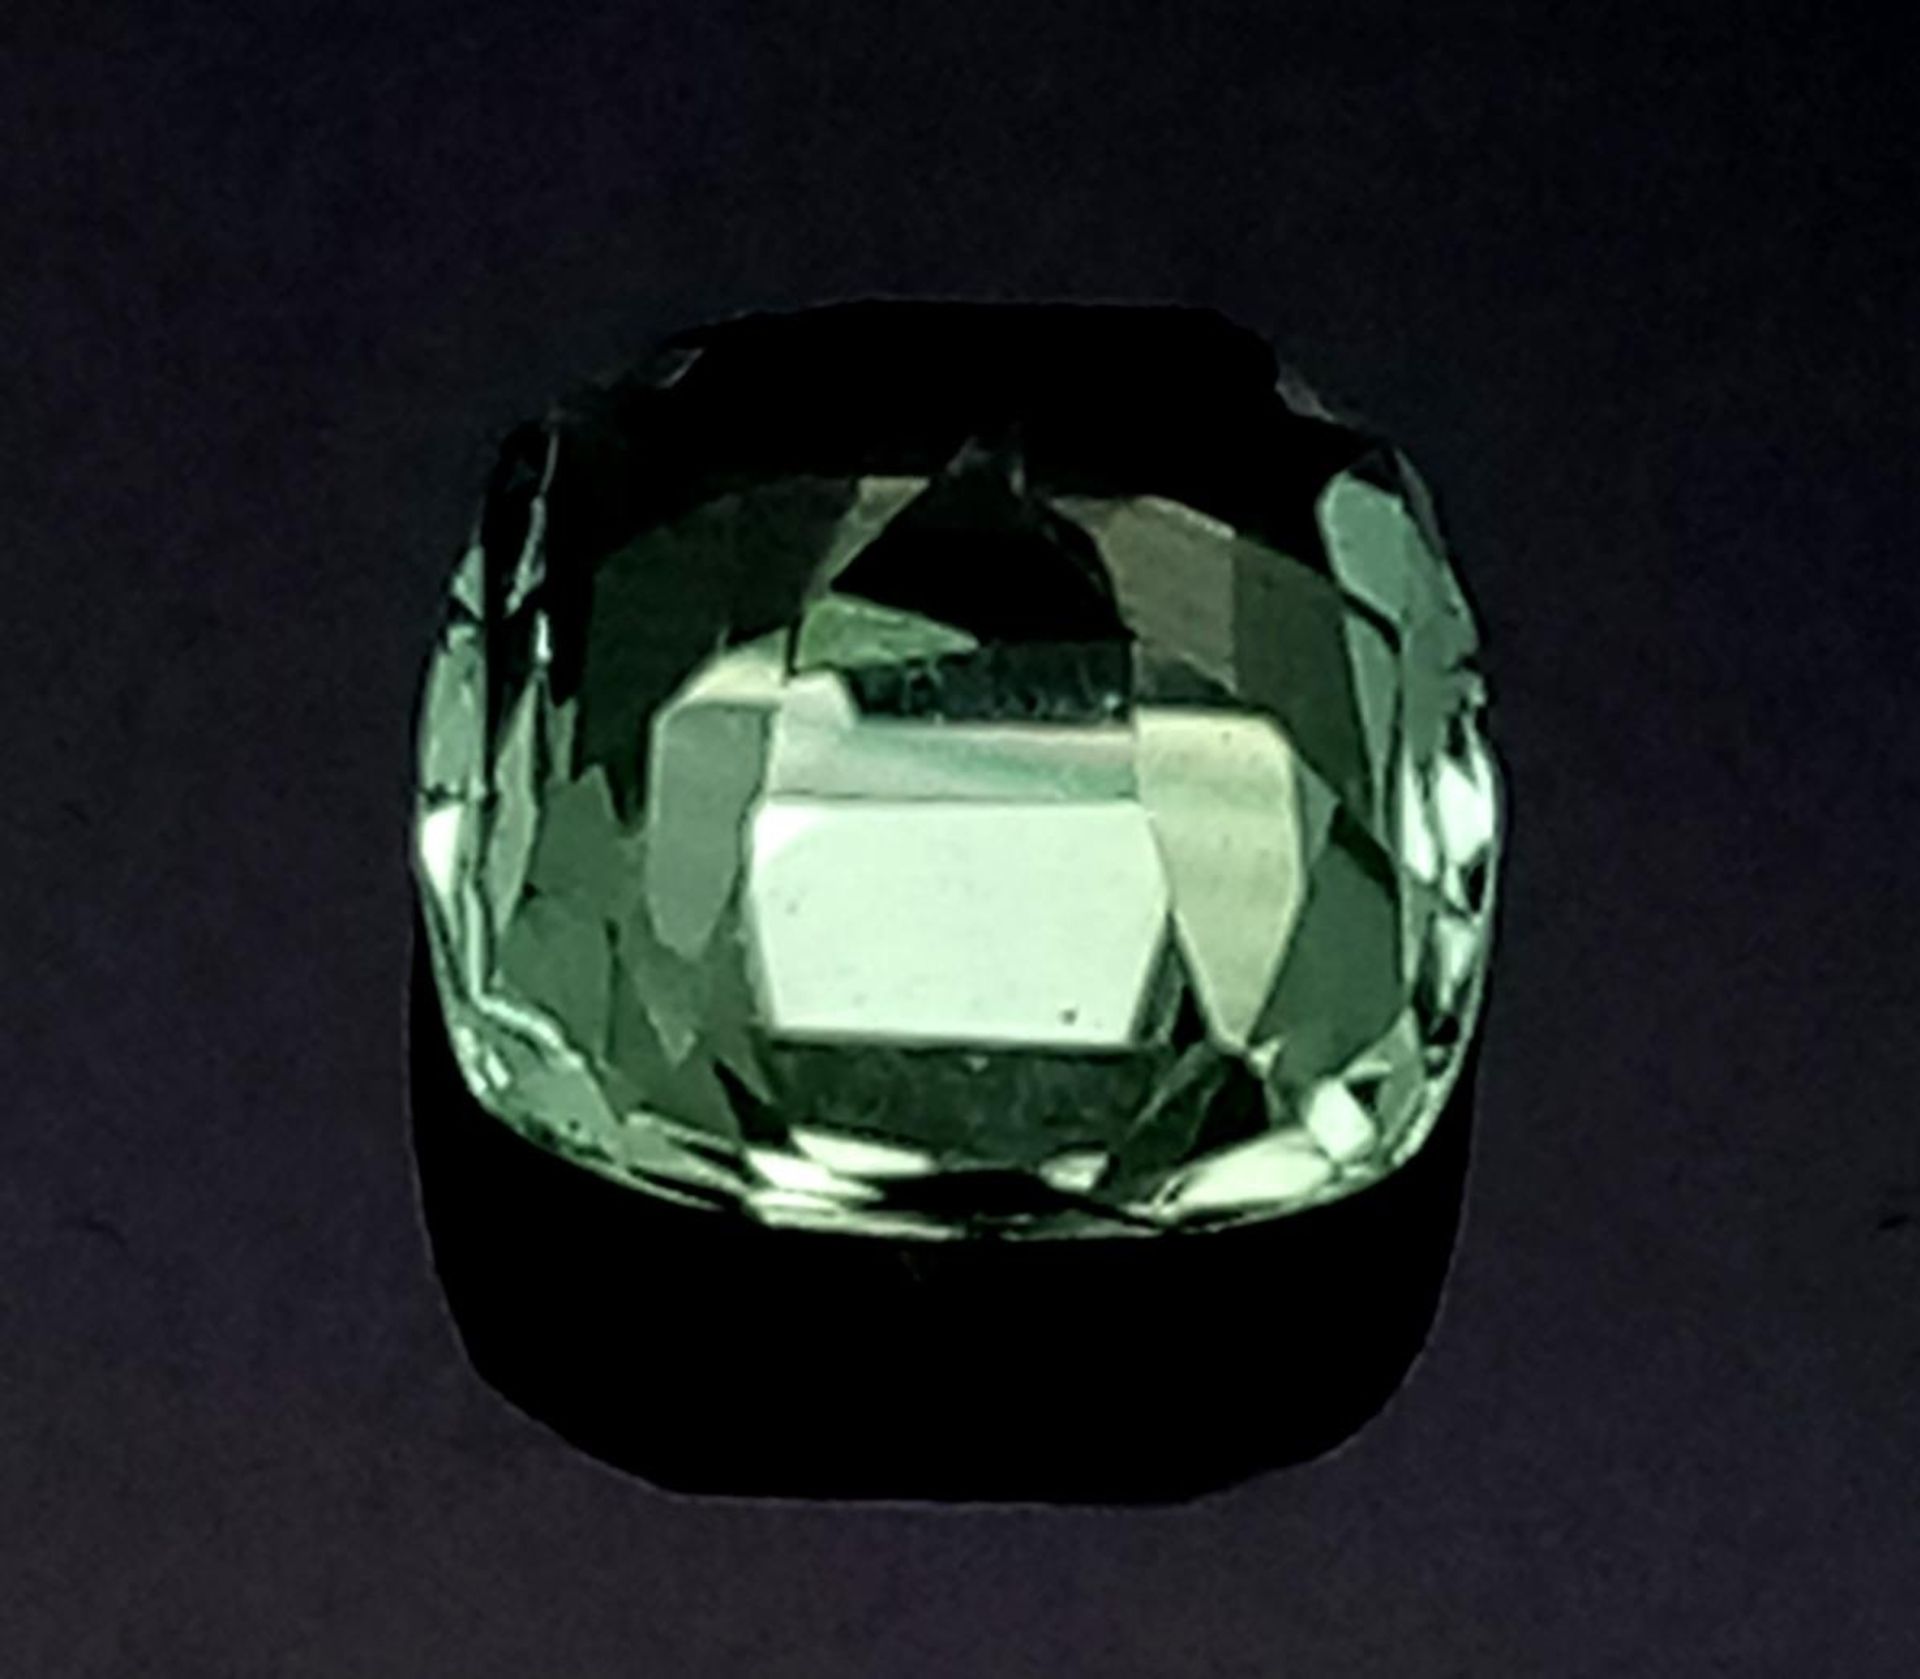 A 32.73ct Oval Madagascan Tourmaline Gemstone. AIG Certified. - Image 3 of 4